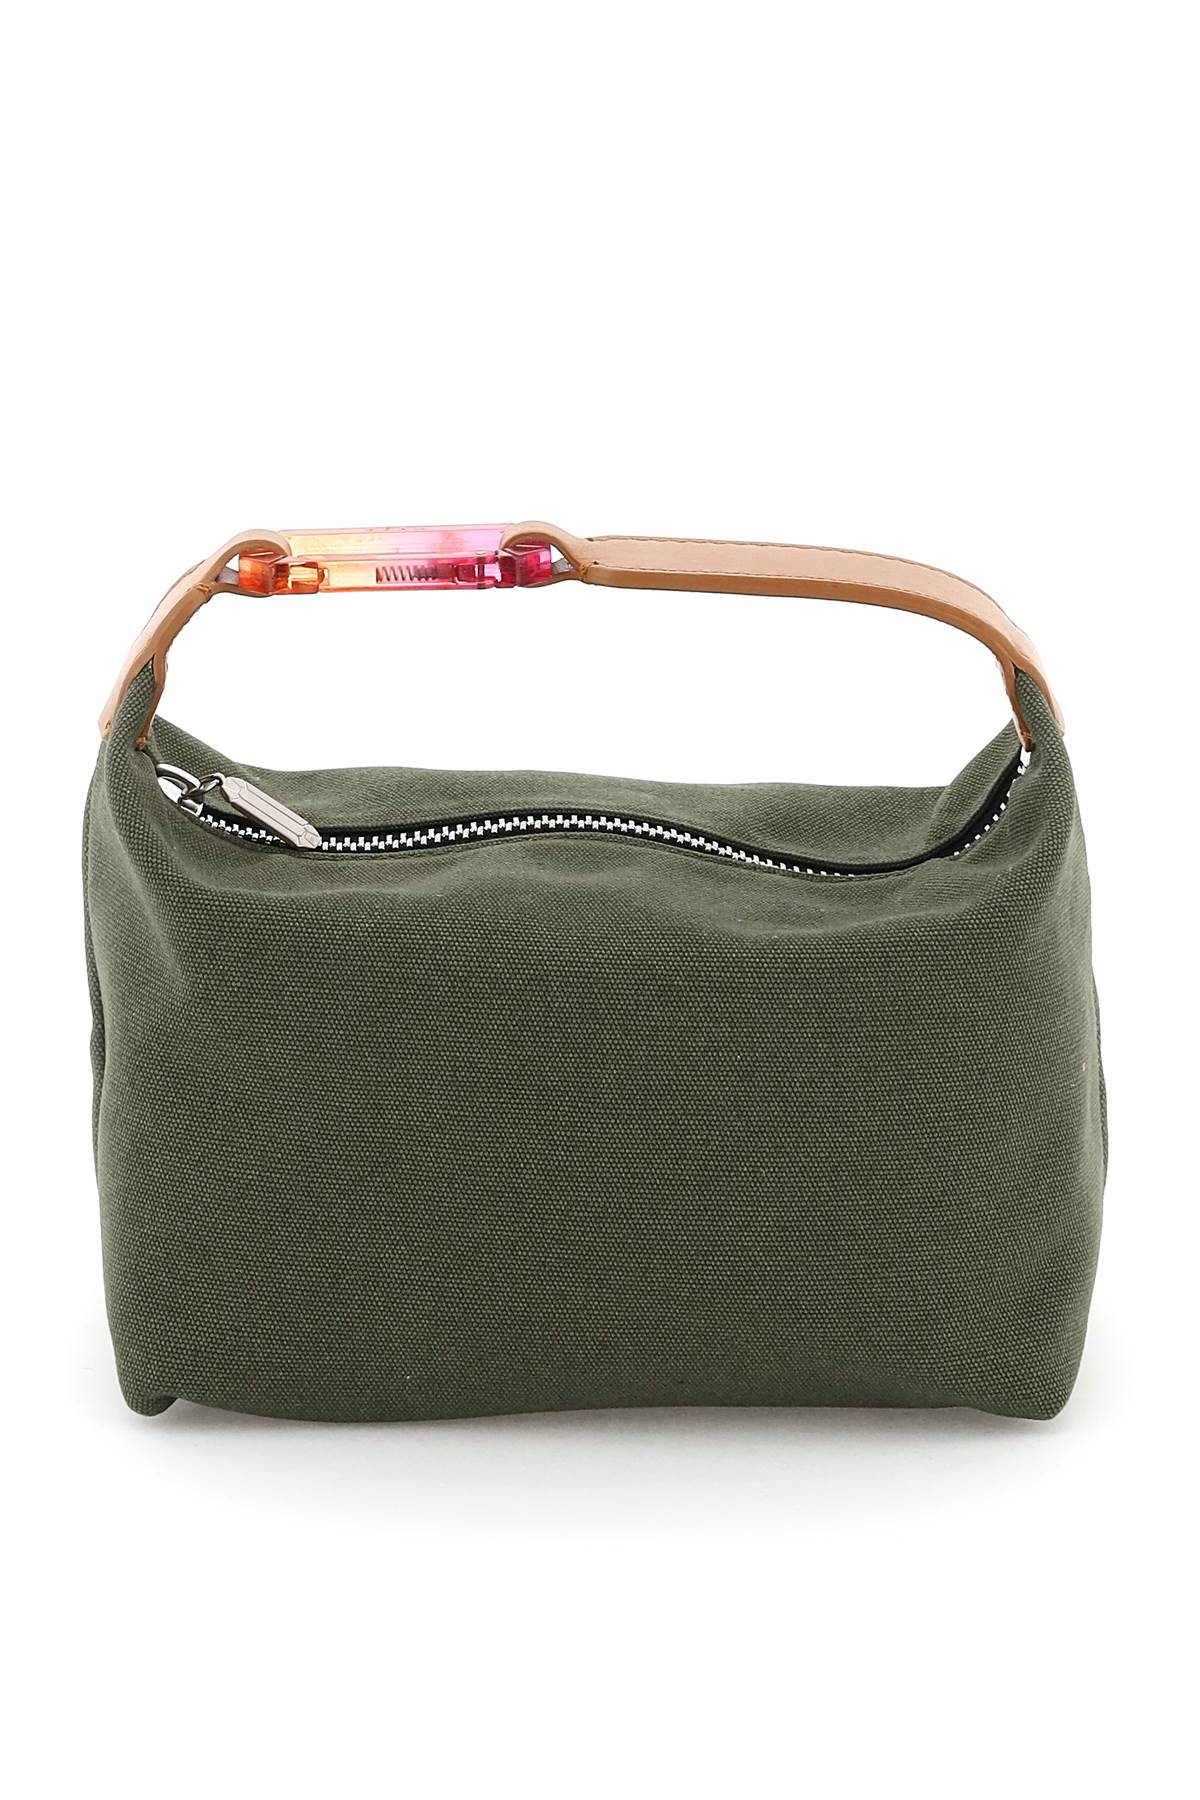 EÉRA Green Cotton Canvas Moonbag with Single Top Handle and Degrade Snap Hook